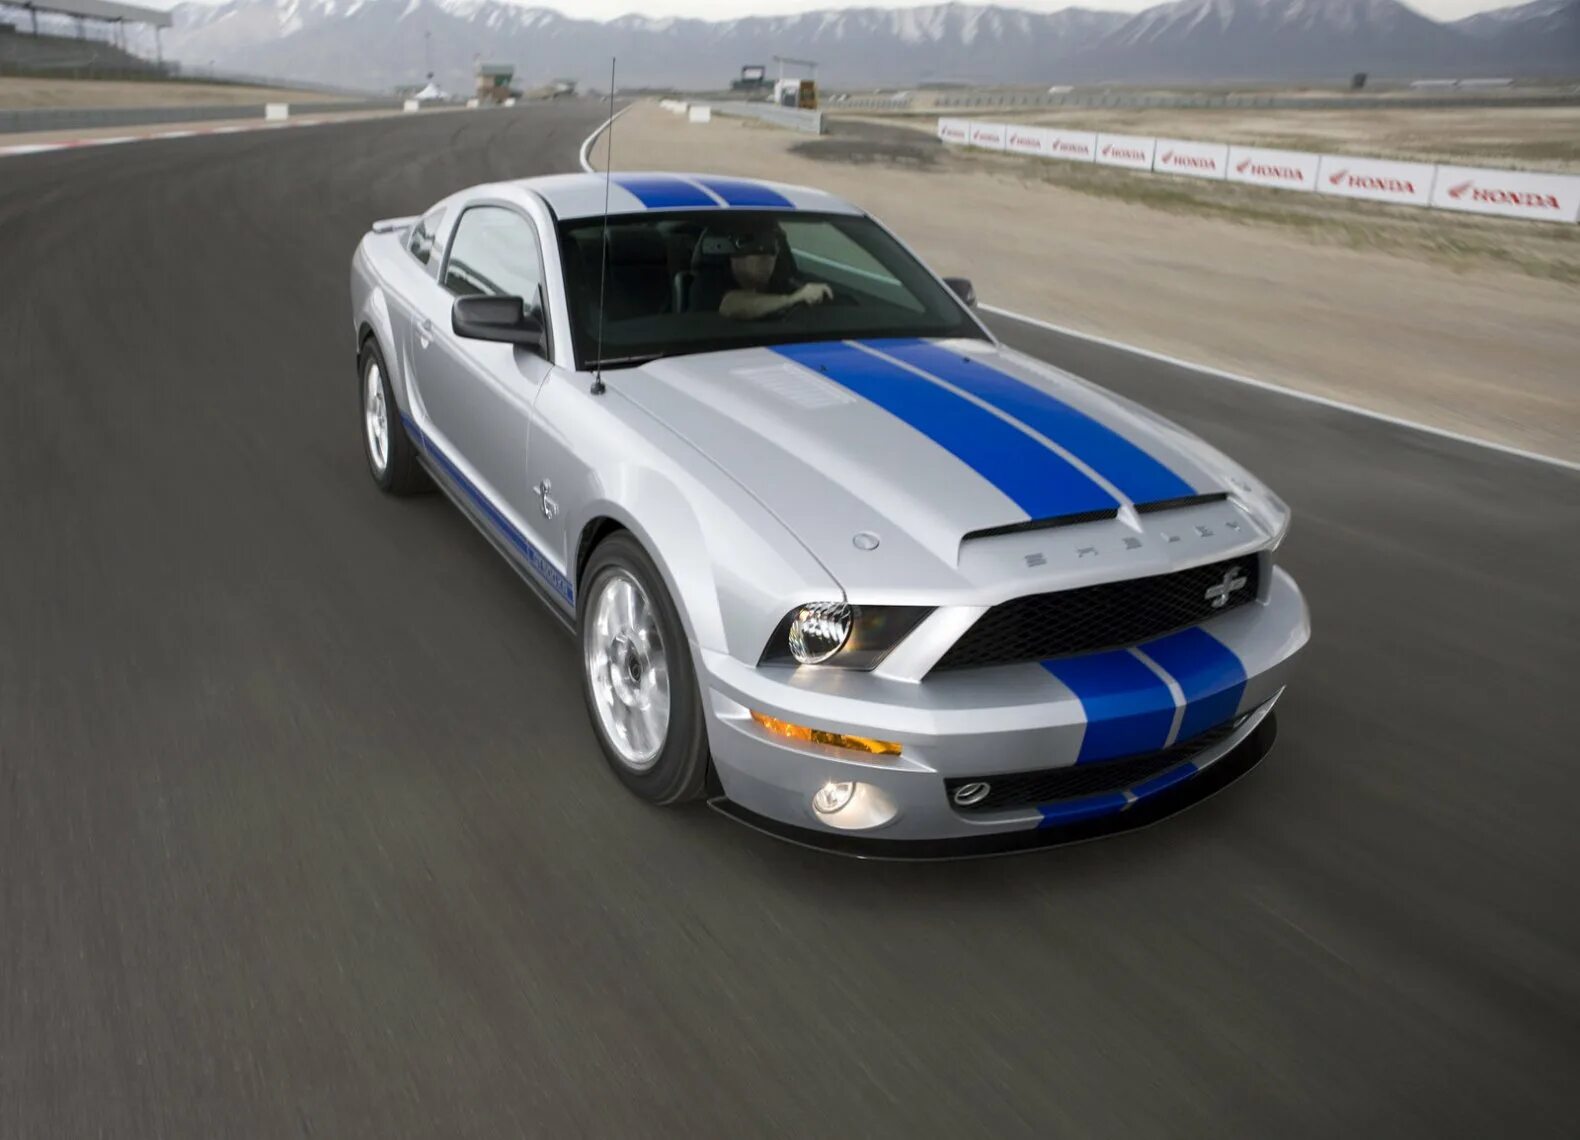 Mustang shelby gt 500. Ford Shelby gt500. Форд Мустанг Шелби gt 500. Ford Shelby gt500kr 2008. Ford Mustang Shelby gt500kr 2008.